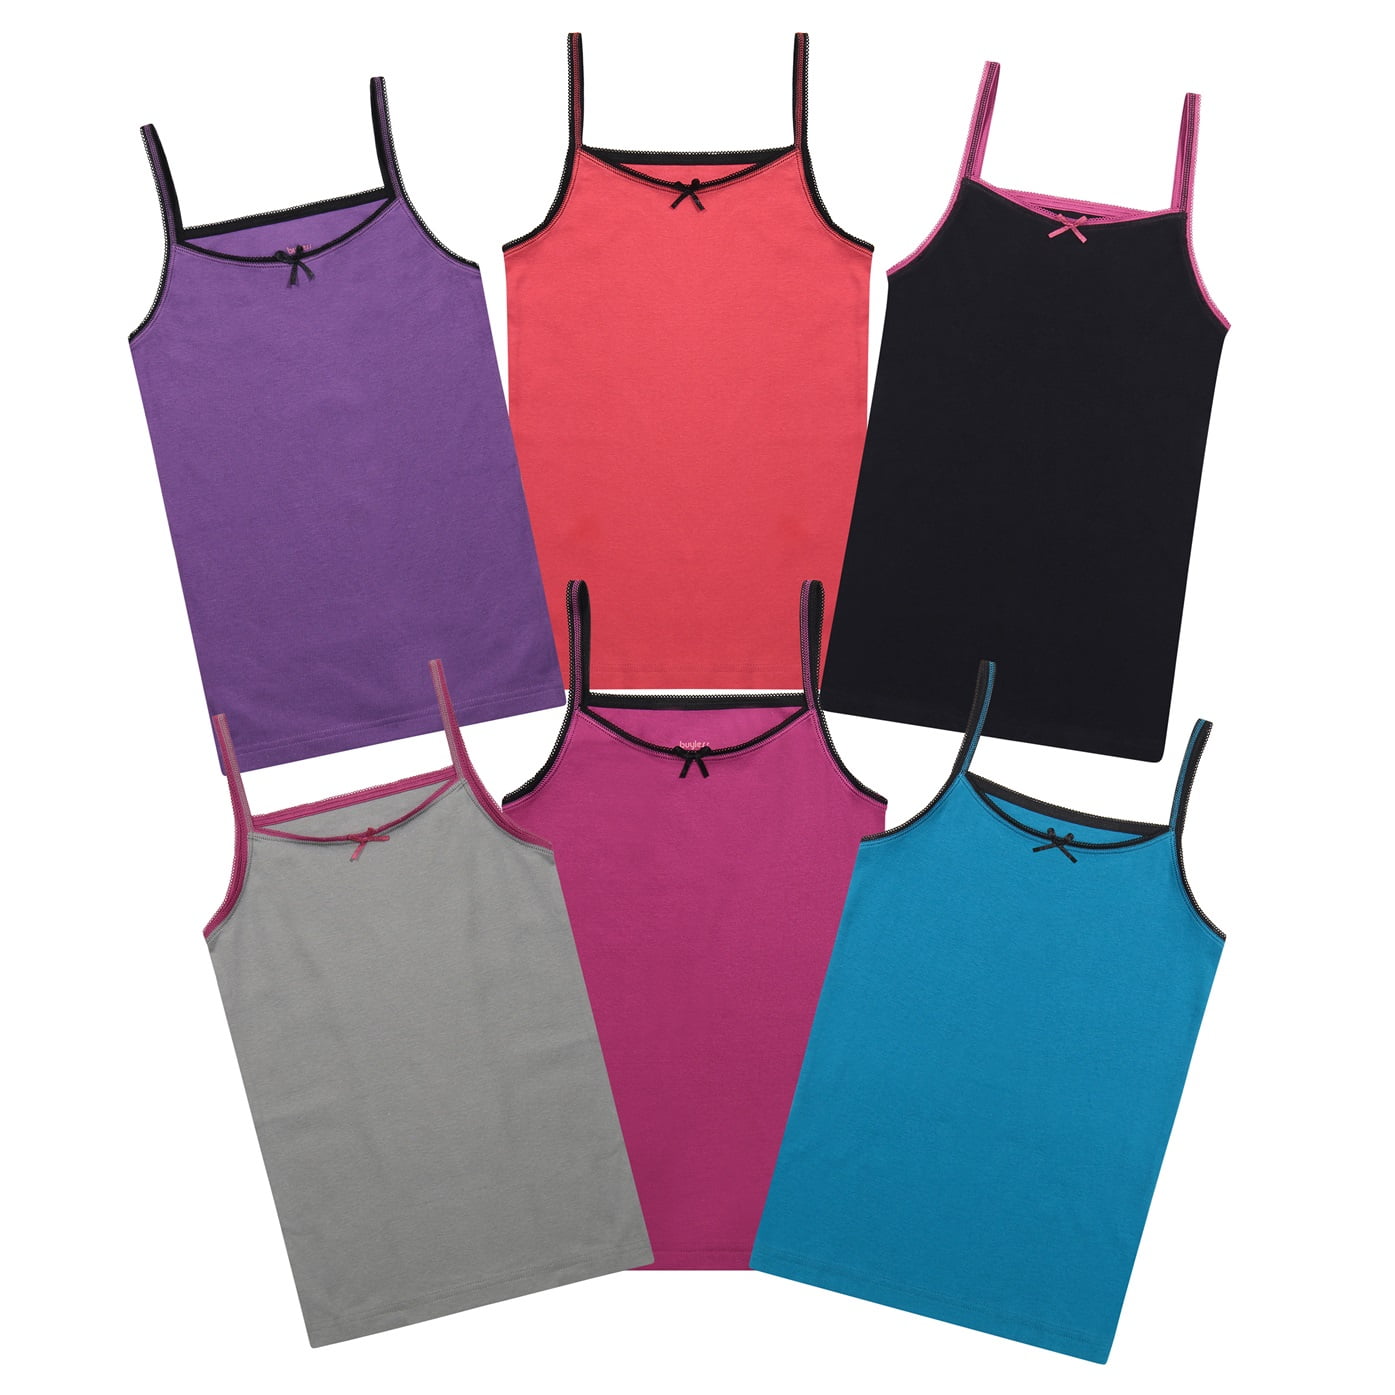 Buyless Fashion Girls Tagless Cami Scoop Neck Undershirts Cotton Tank with Trim and Strap 4 Pack